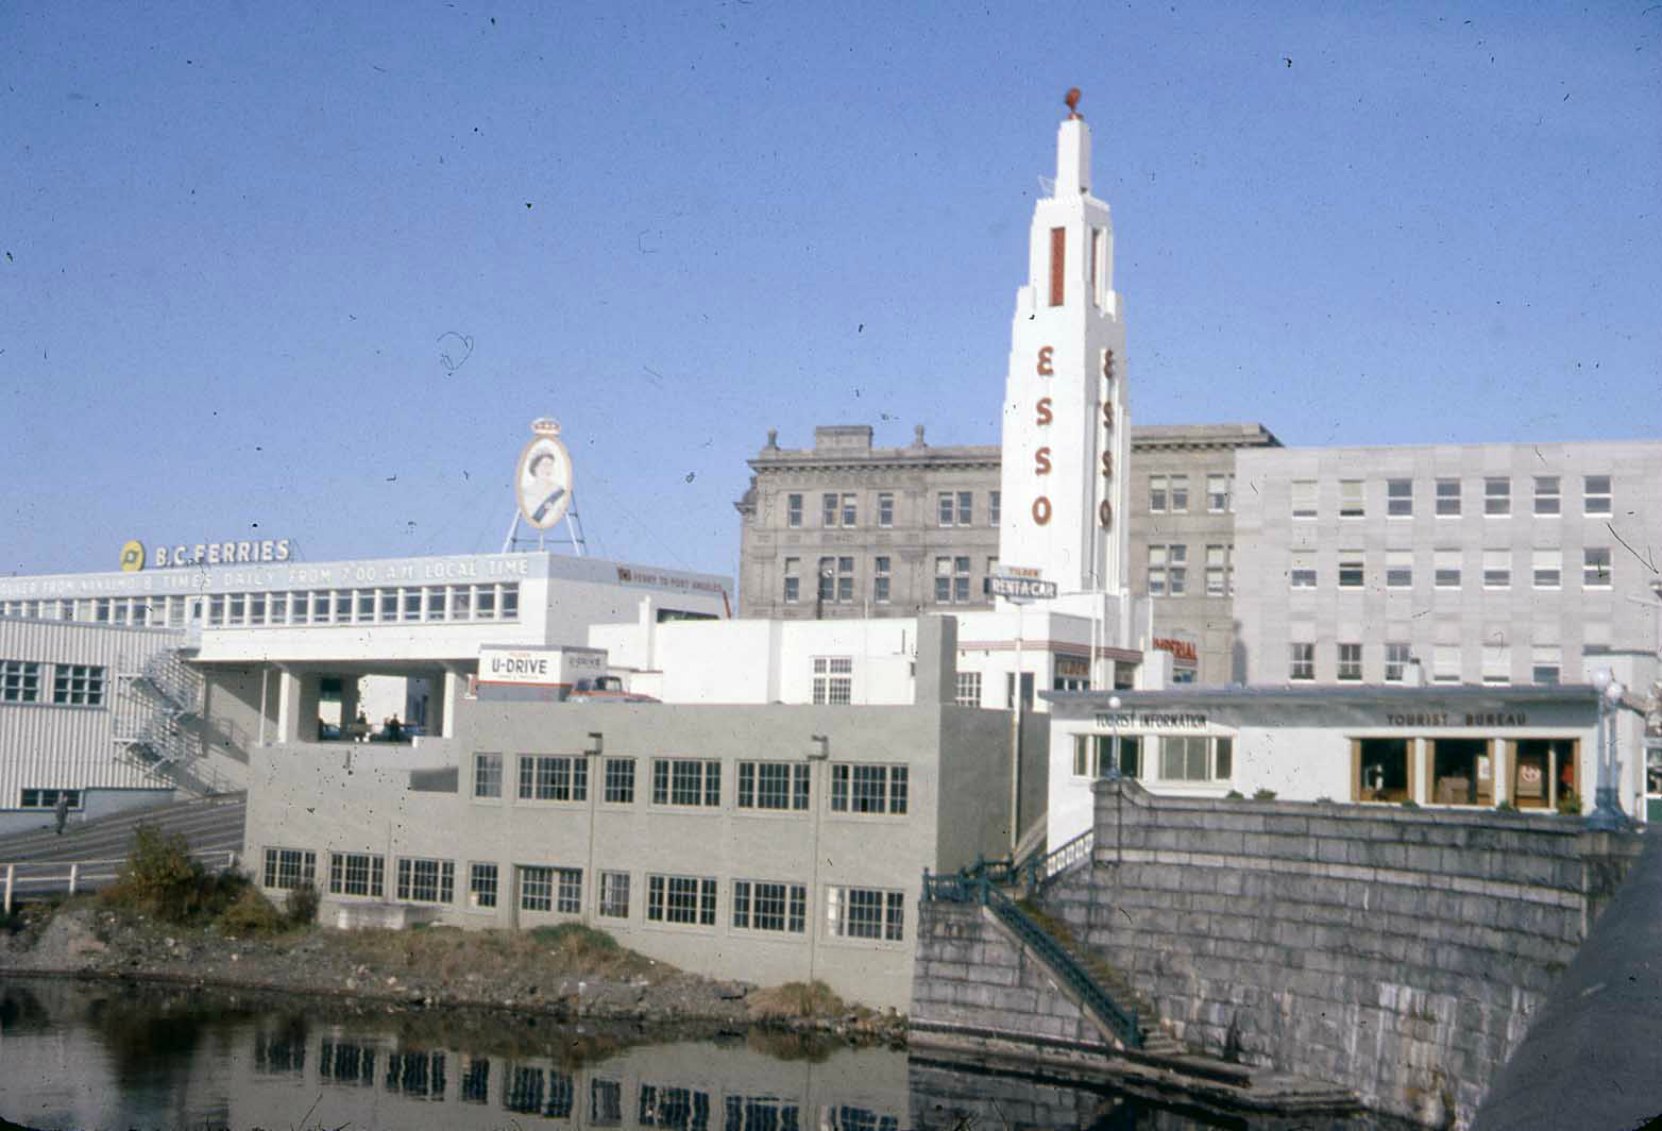 812 Wharf Street as an ESSO station, circa 1960. Note the adjacent BC Ferries terminal. (photo courtesy of Glenbow Museum, used with permission)